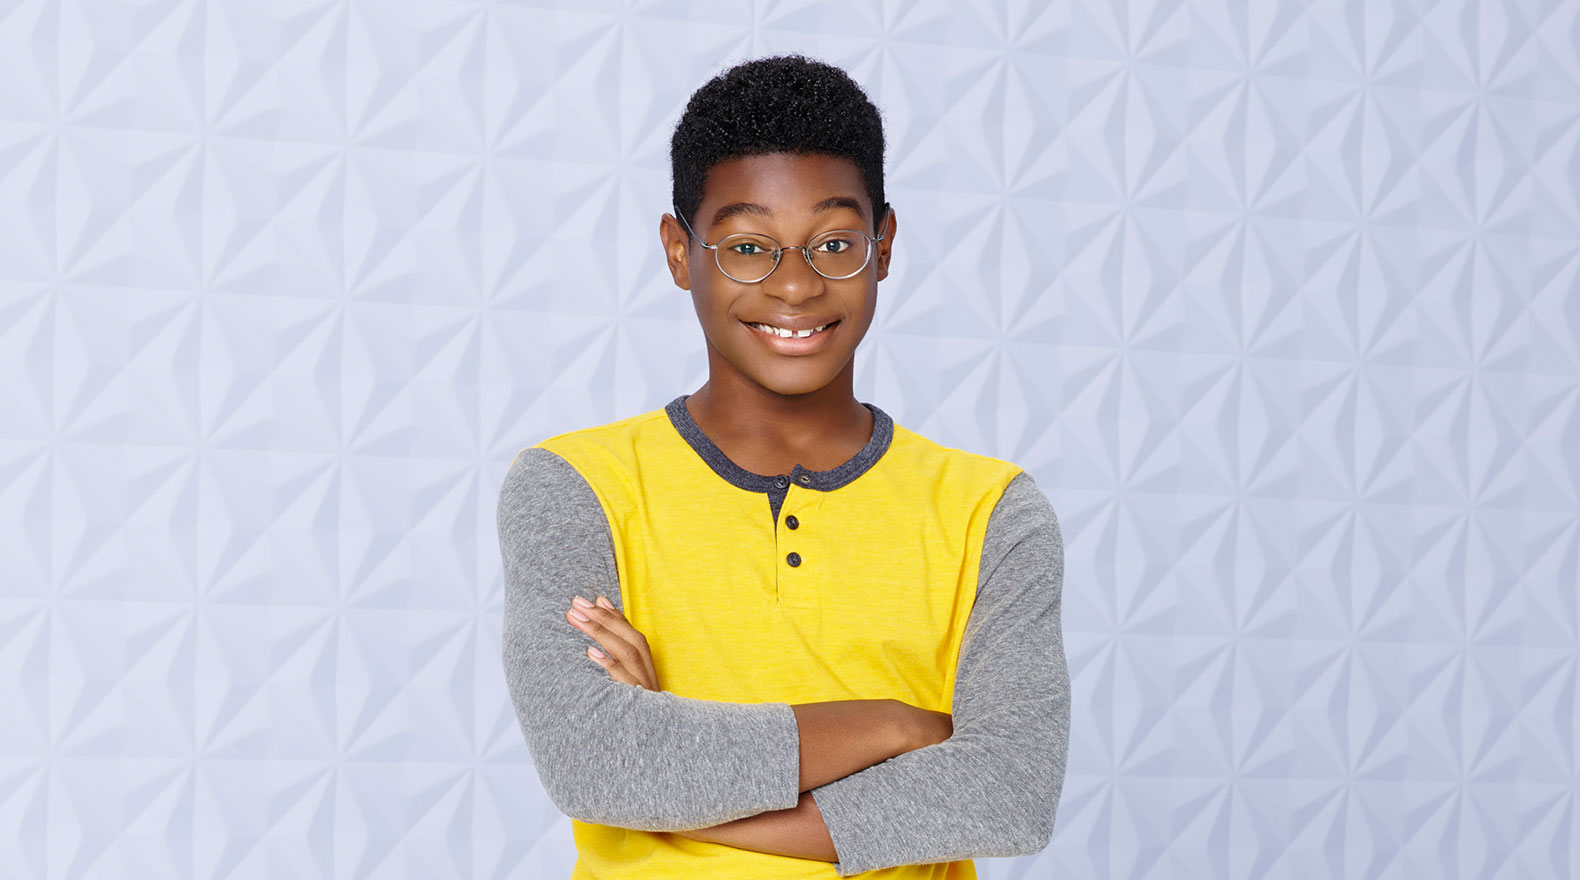 ernie from kc undercover